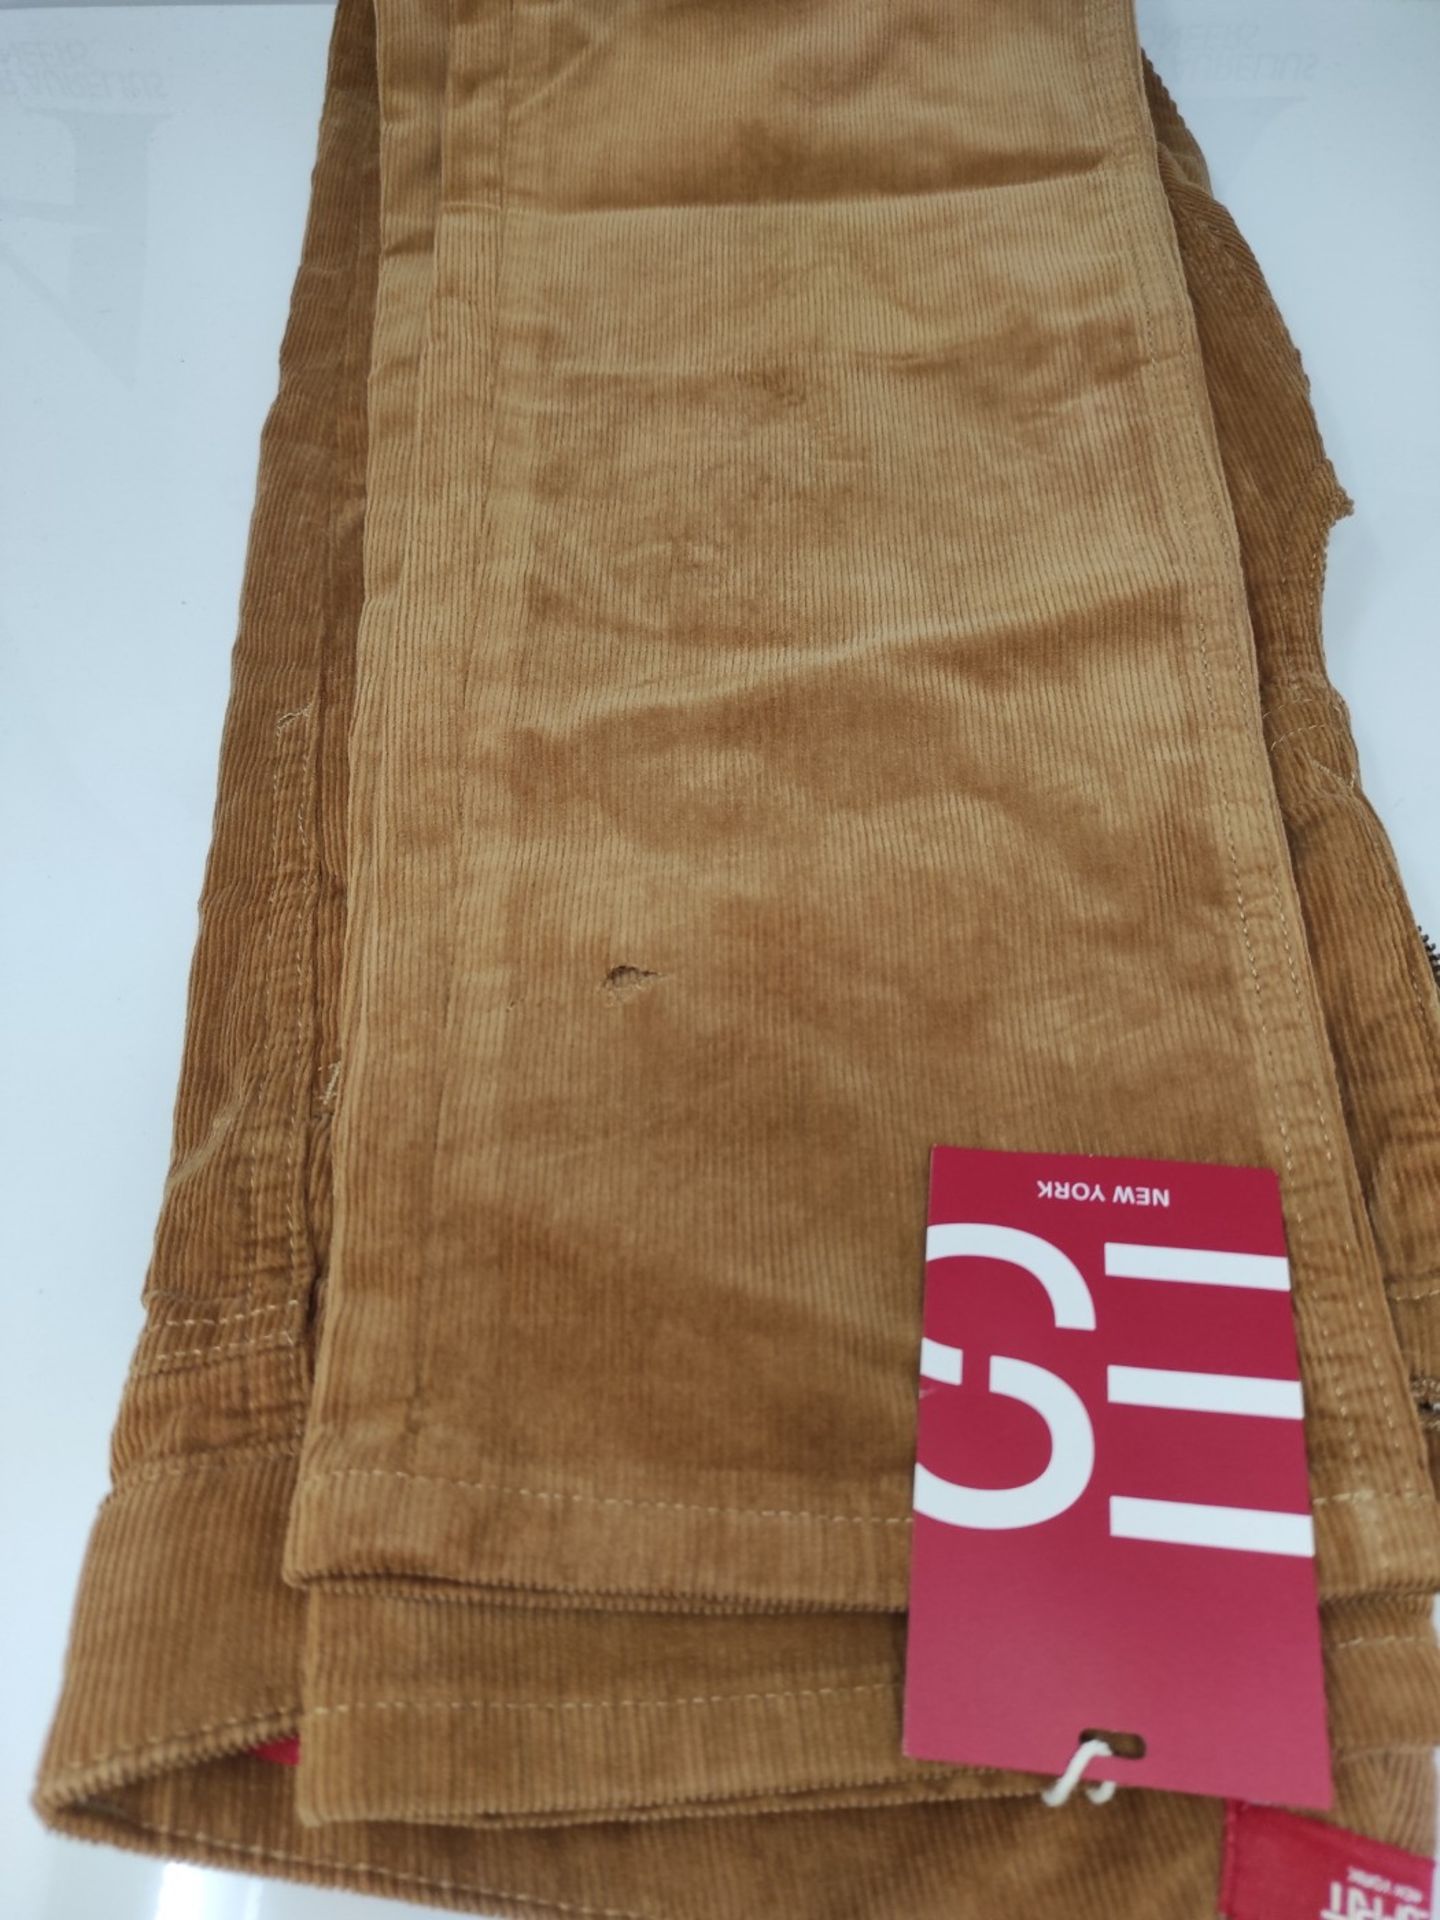 ESPRIT corduroy pants with a slim fit and medium rise waist.